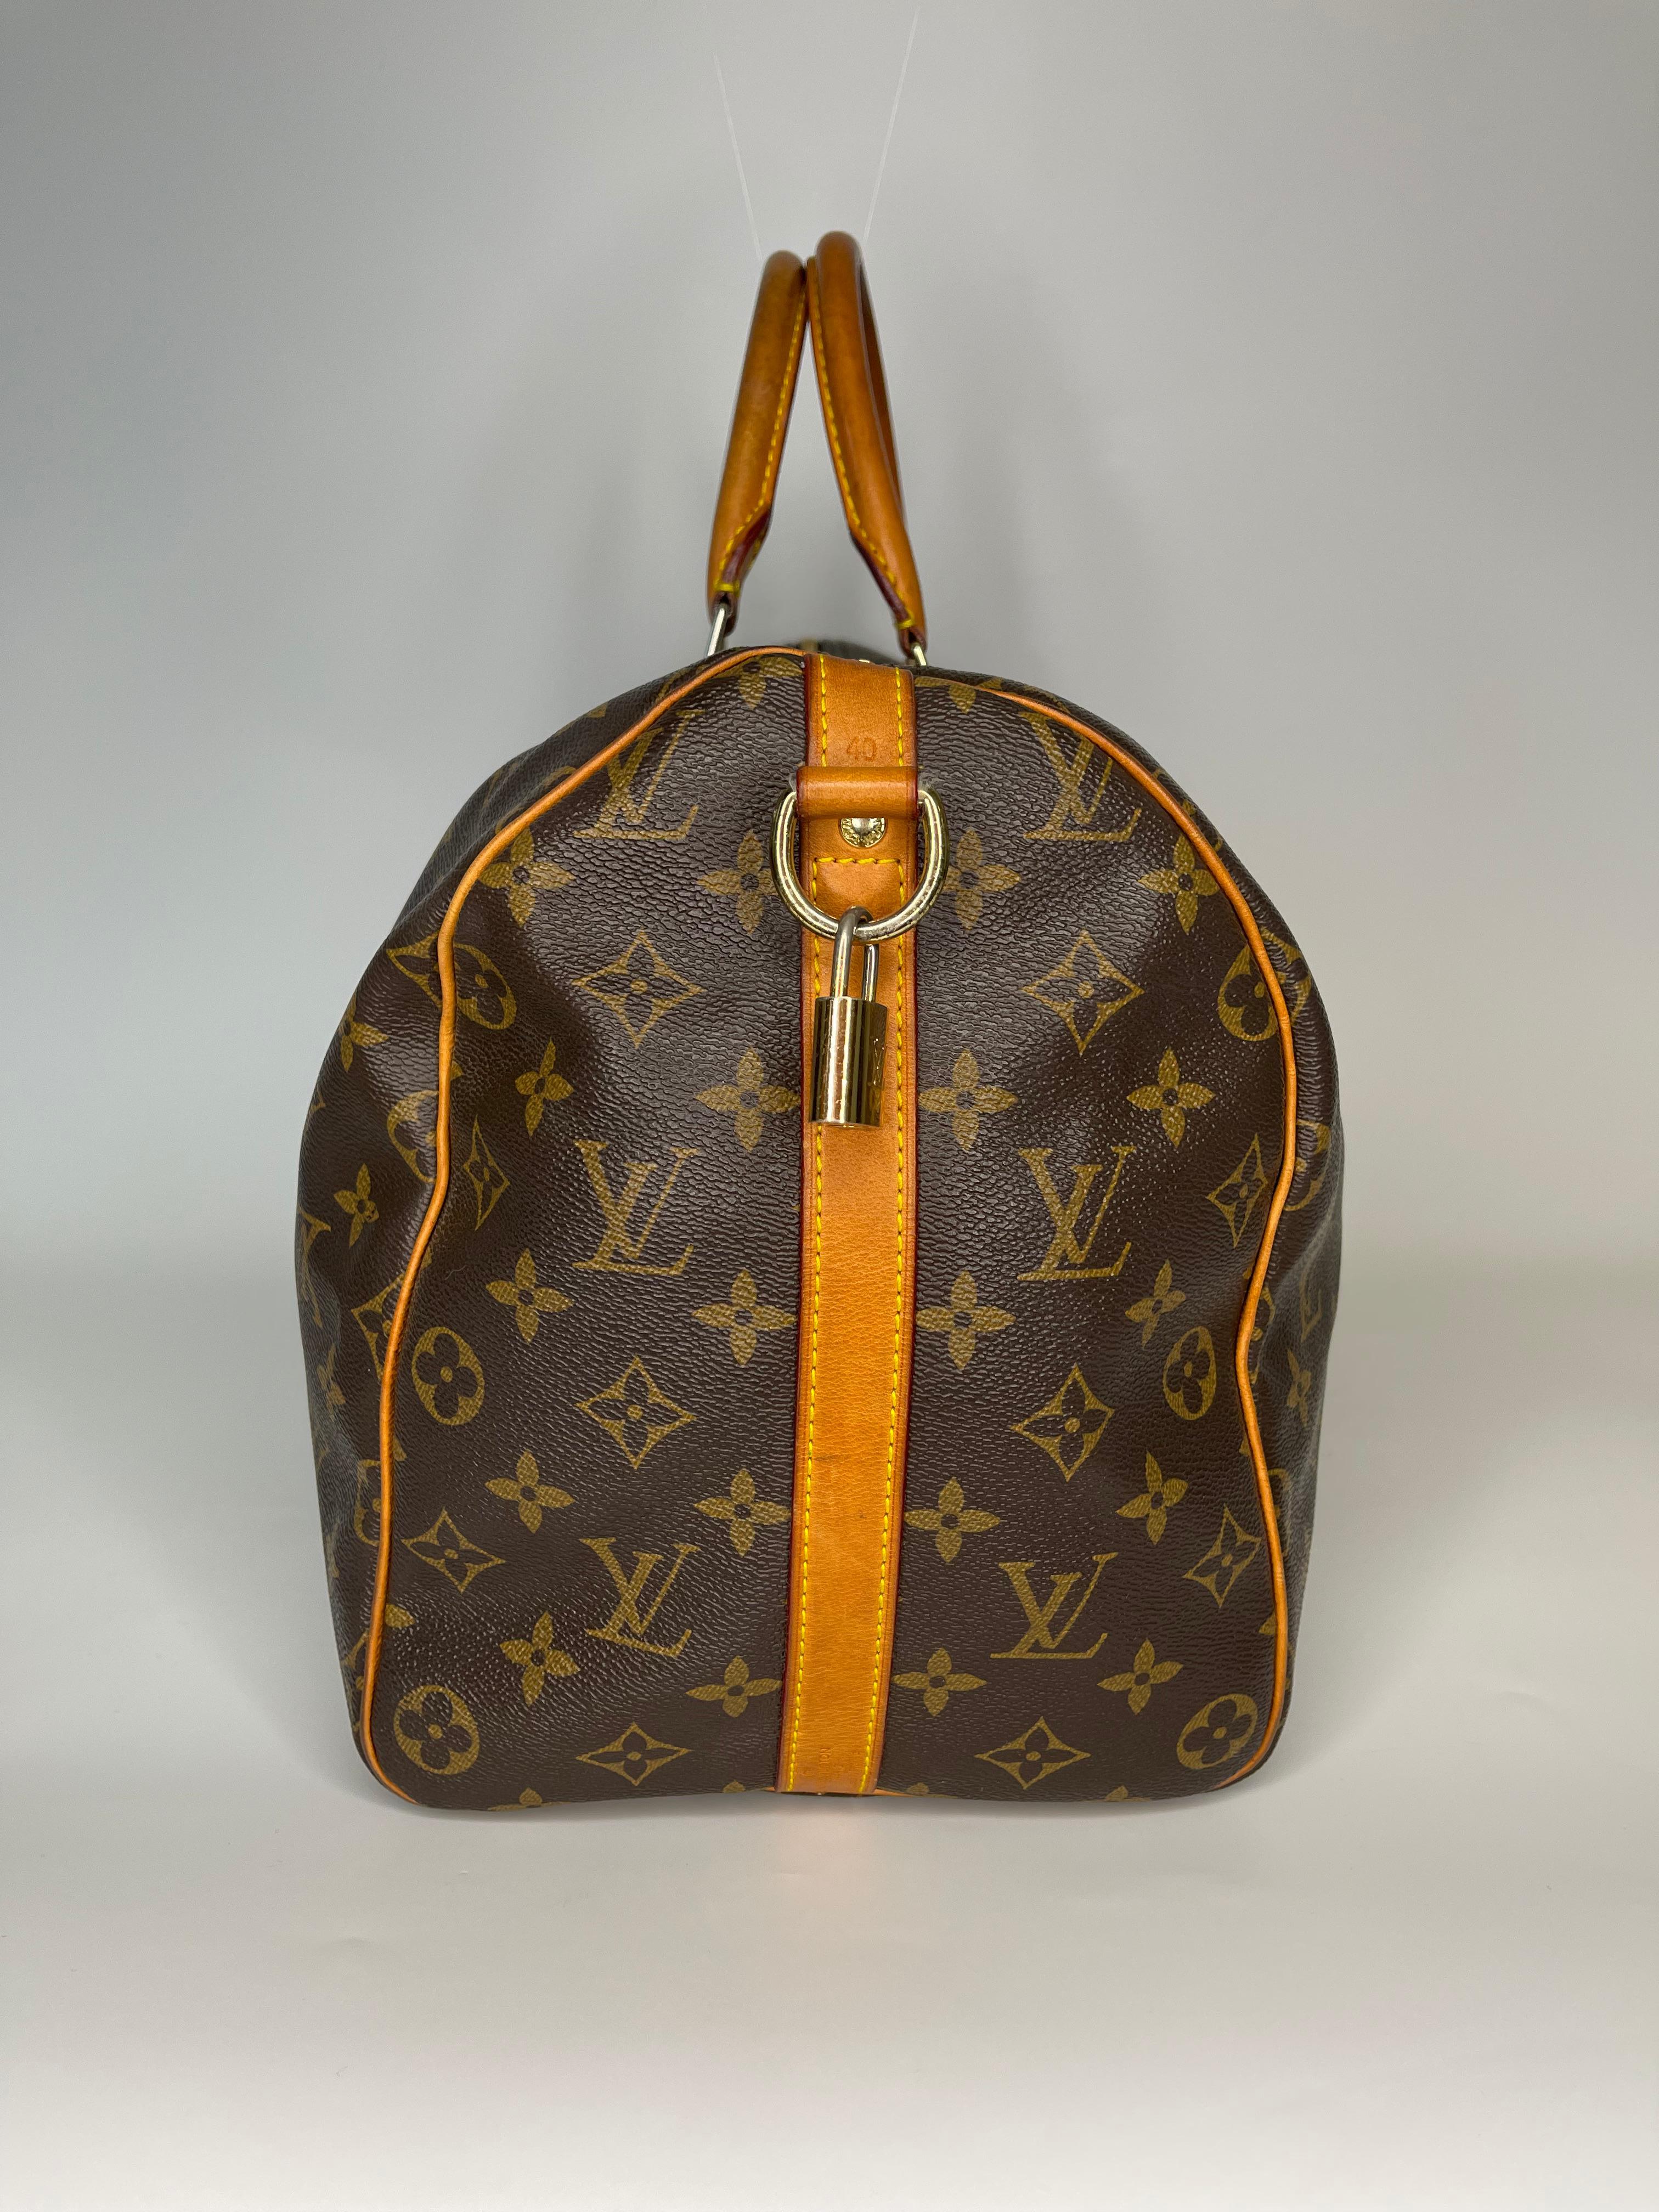 This classic Louis Vuitton bag is the Speedy Bandouliere and it is made with brown canvas with monogram print with aged natural leather finishes. This Speedy Bandouliere bag measuring 40 cm across is a discontinued style. The bag features dual top